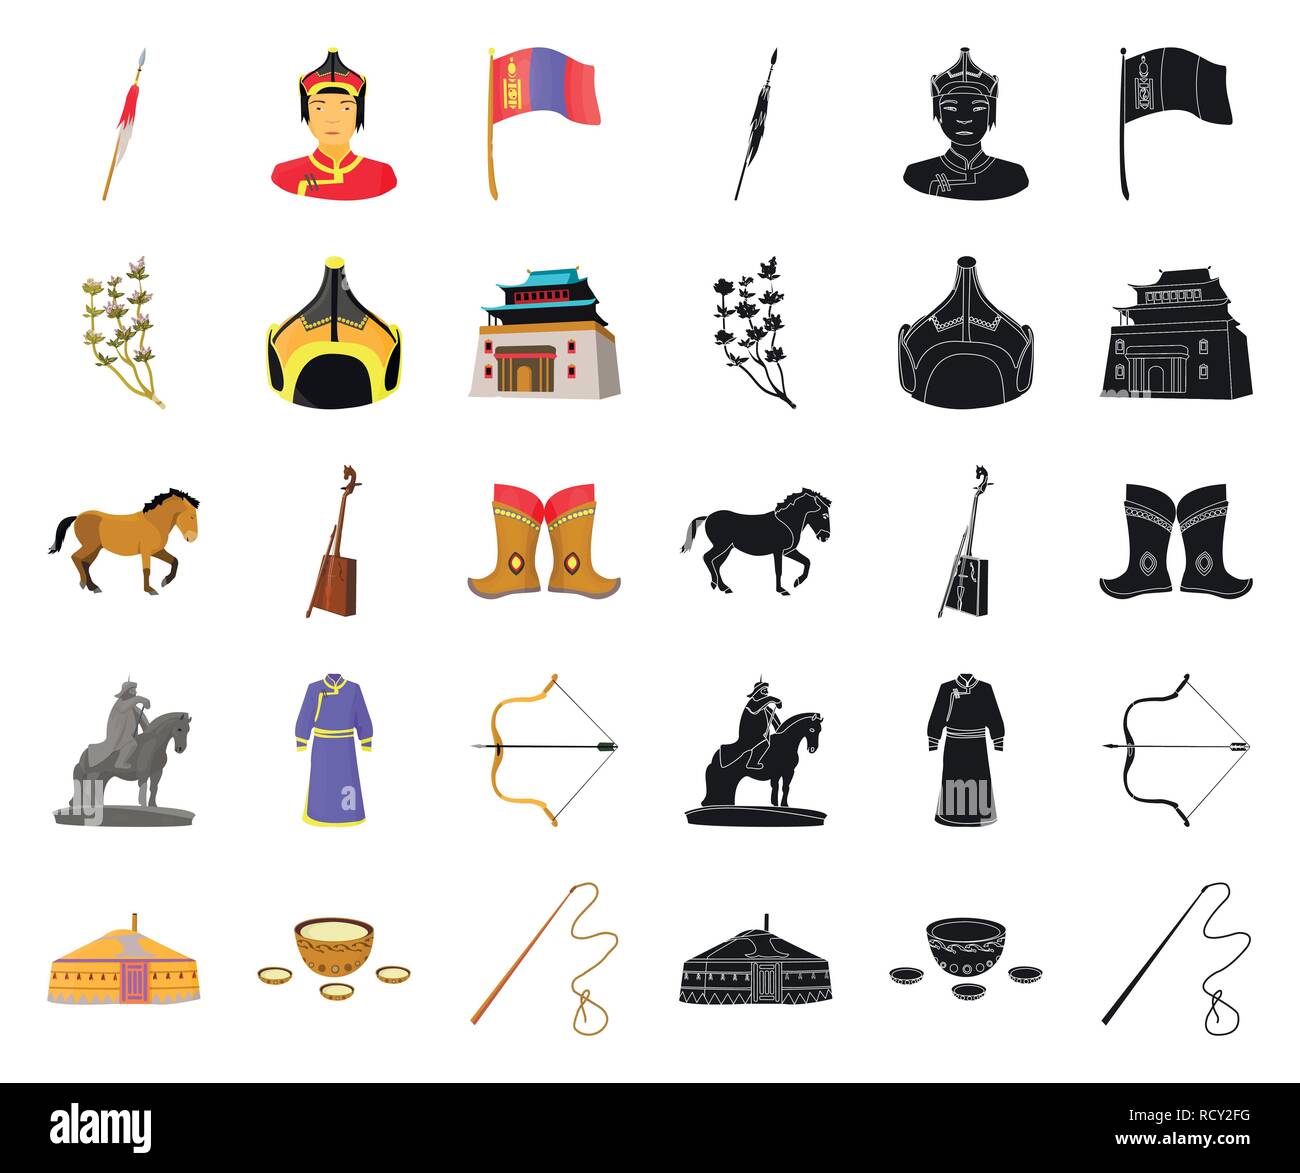 arms,arrow,belt,bow,buddhism,building,cartoon,black,cashmere,coat,collection,country,culture,flag,flower,fur,genghis,gutuly,headdress,horse,hudak,icon,illustration,instrument,khan,kialis,kumis,landmark,leather,map,monastery,mongol,mongolia,monument,musical,nature,religion,robe,set,shoes,sign,spear,temple,territory,tradition,travel,vector,whip,wool,yurt Vector Vectors , Stock Vector